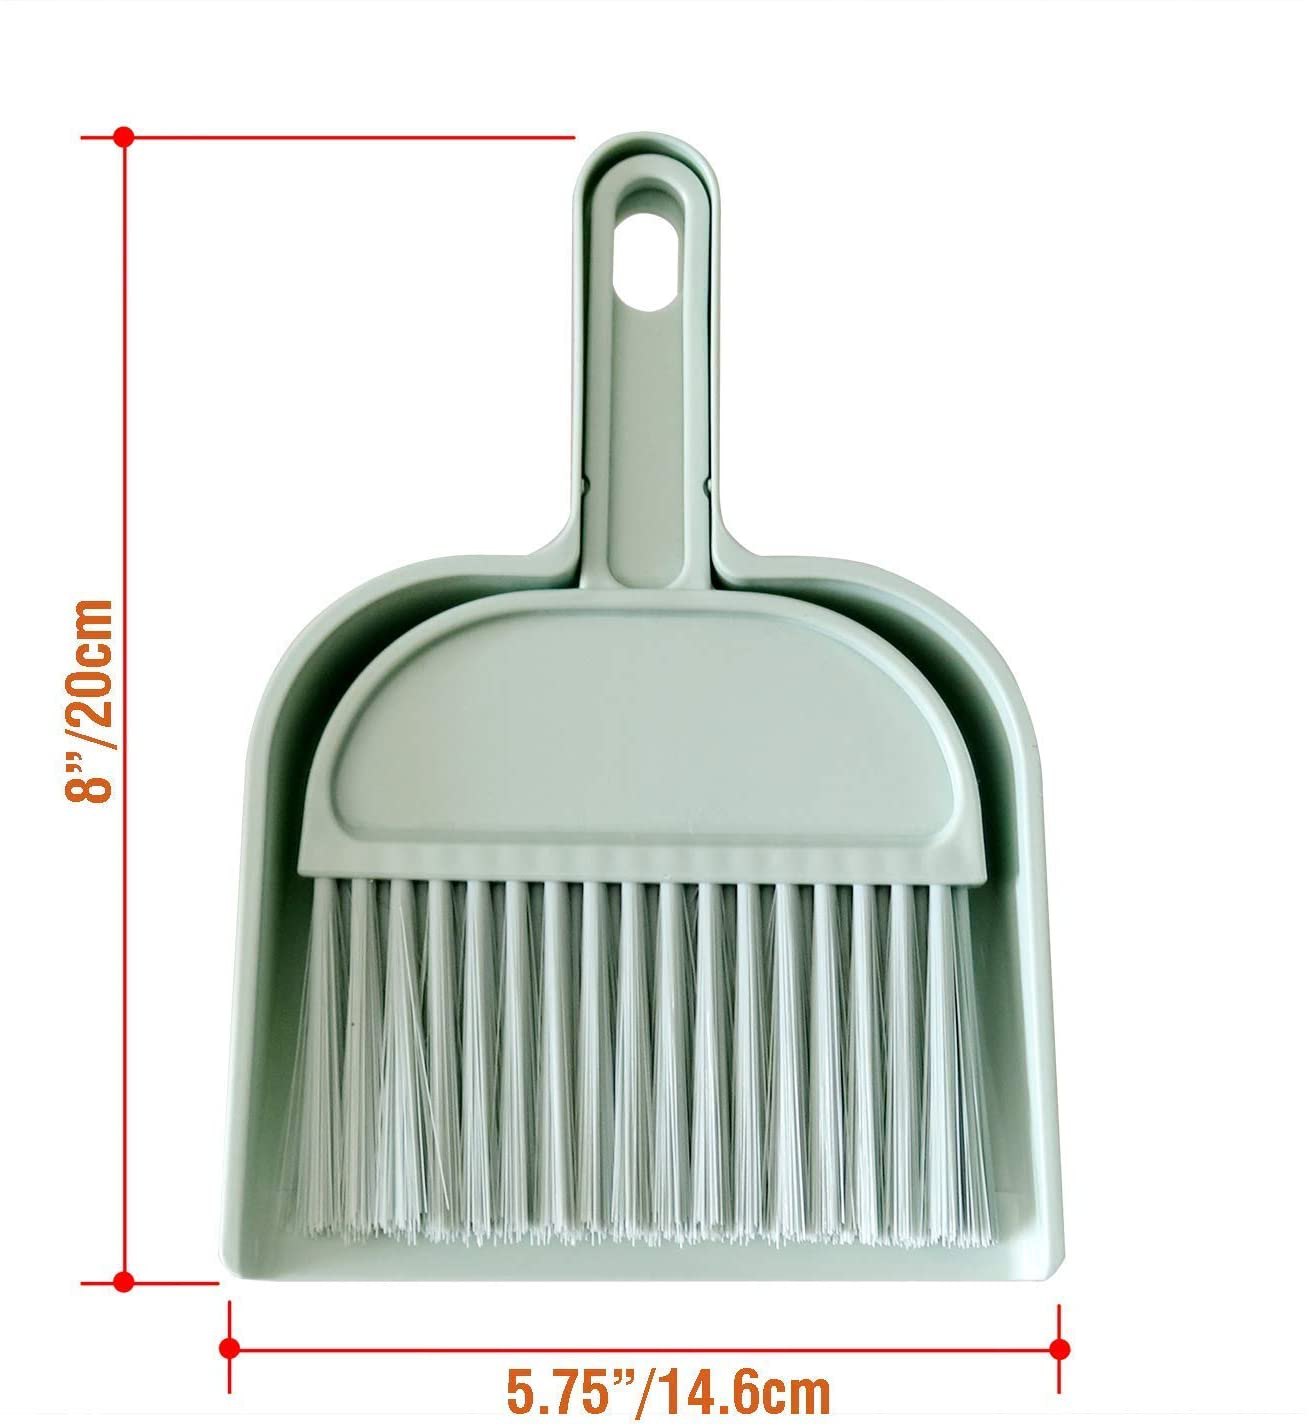 Rypet Cage Cleaner for Guinea Pigs, Hamsters, Chinchillas, Rabbits, Reptiles, Hedgehogs and Other Small Animals - Mini Dustpan and Brush Set Cleaning Tool for Animal Waste (1 Pack) Animals & Pet Supplies > Pet Supplies > Small Animal Supplies > Small Animal Habitat Accessories RYPET   